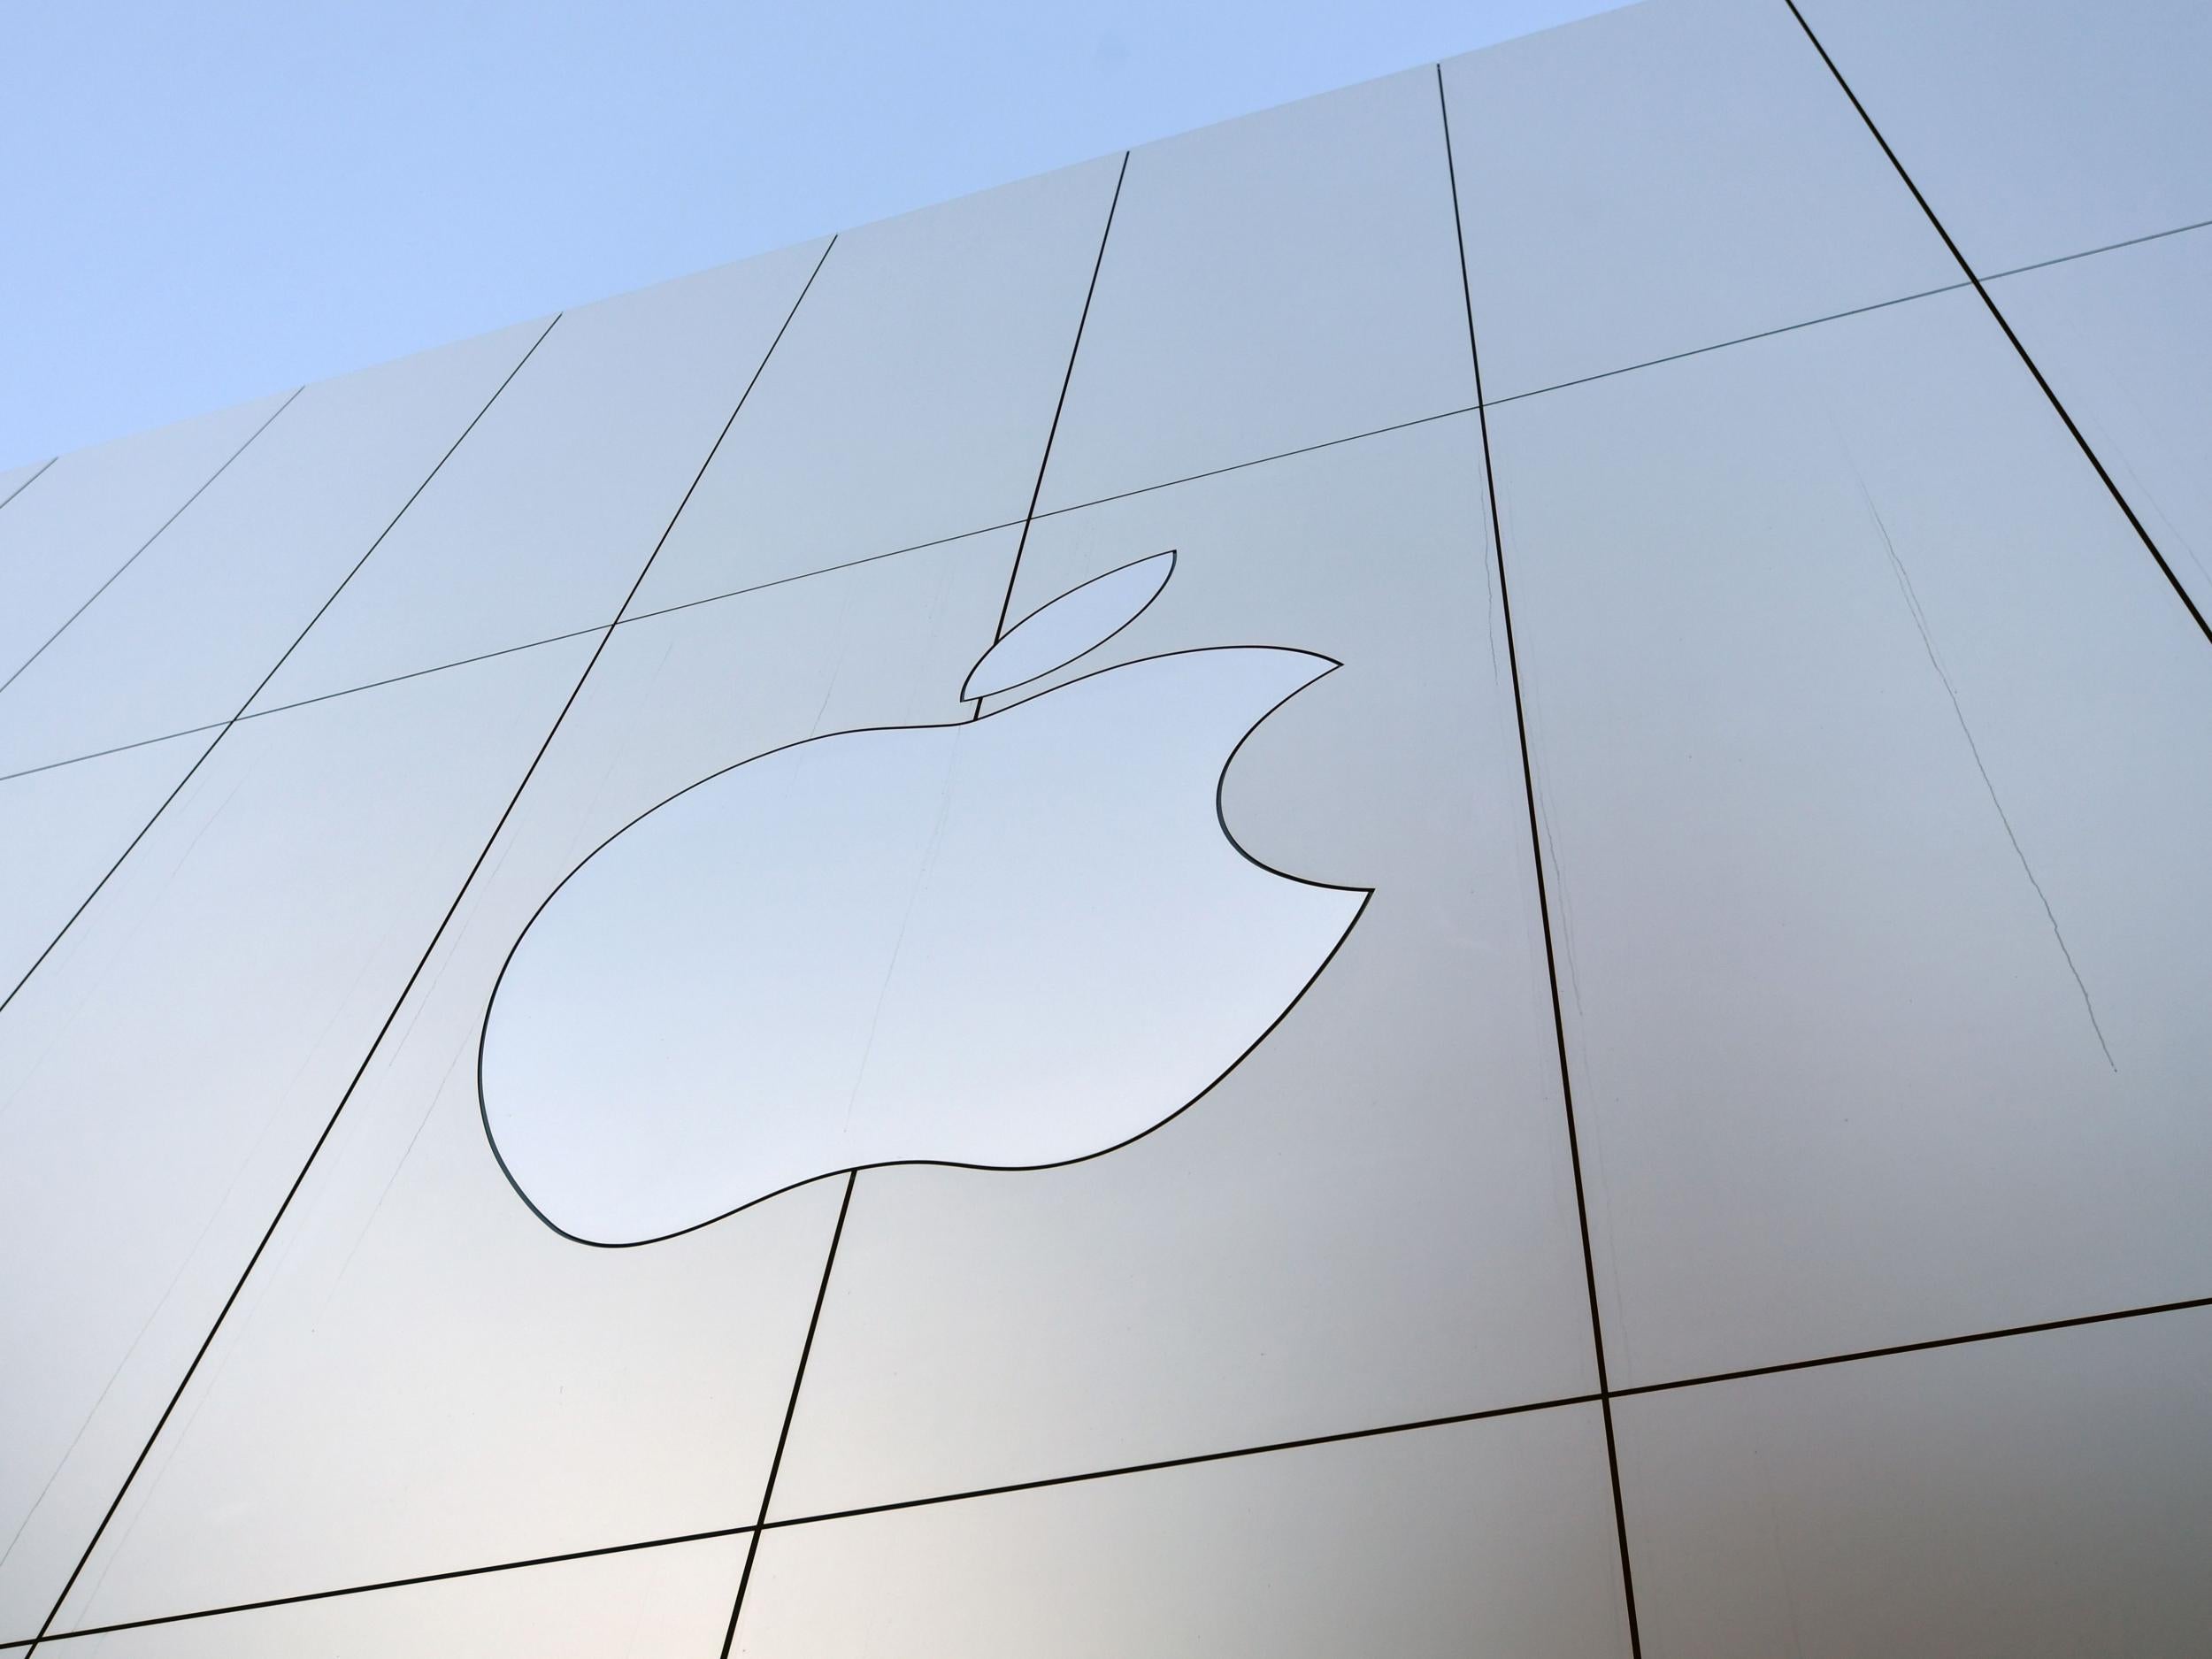 Apple announced plans to build the data centre in a rural location in the west of Ireland to take advantage of rich green energy sources nearby